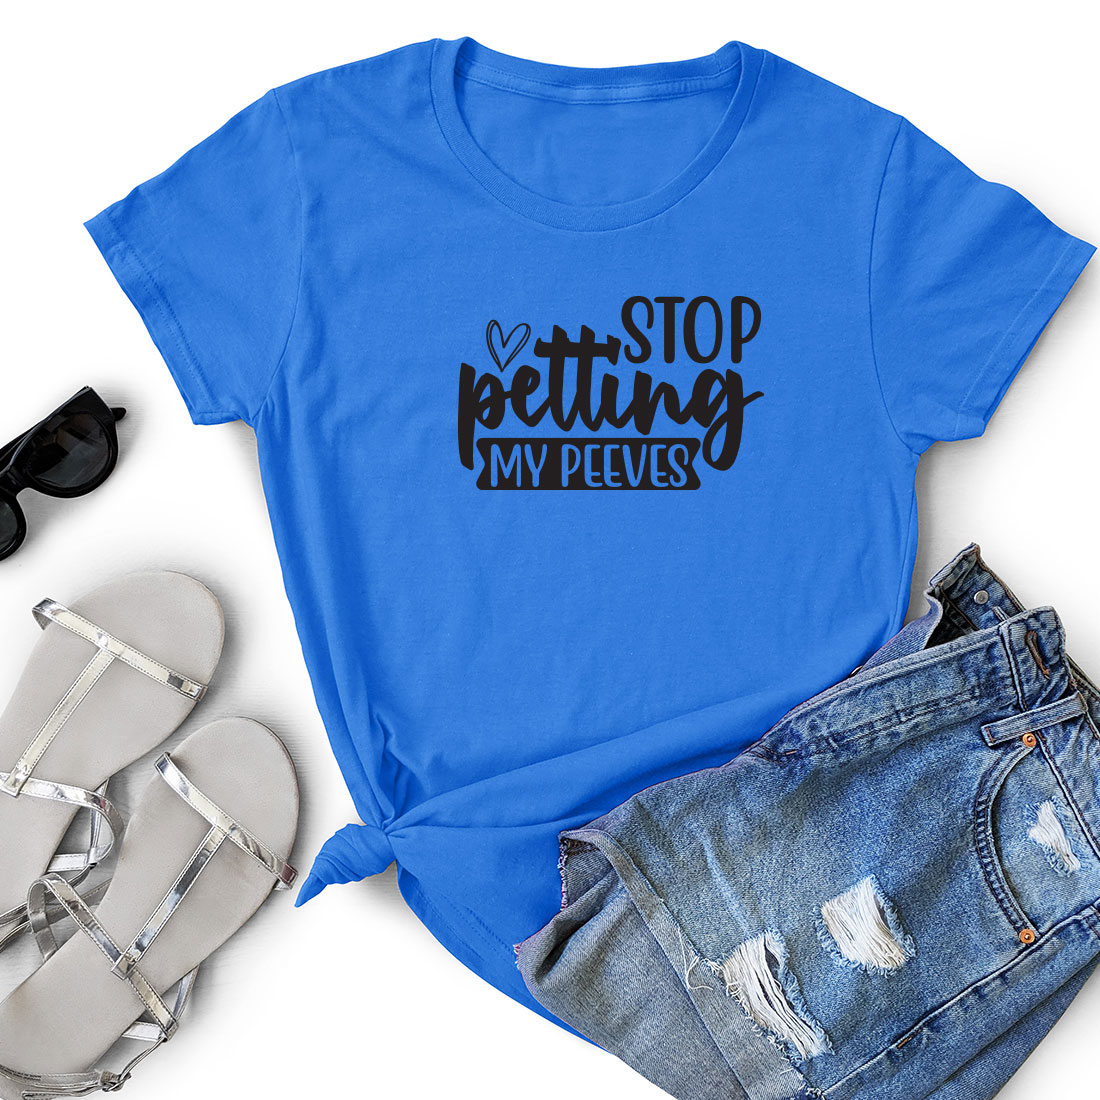 Blue t - shirt that says stop petting my peepies.